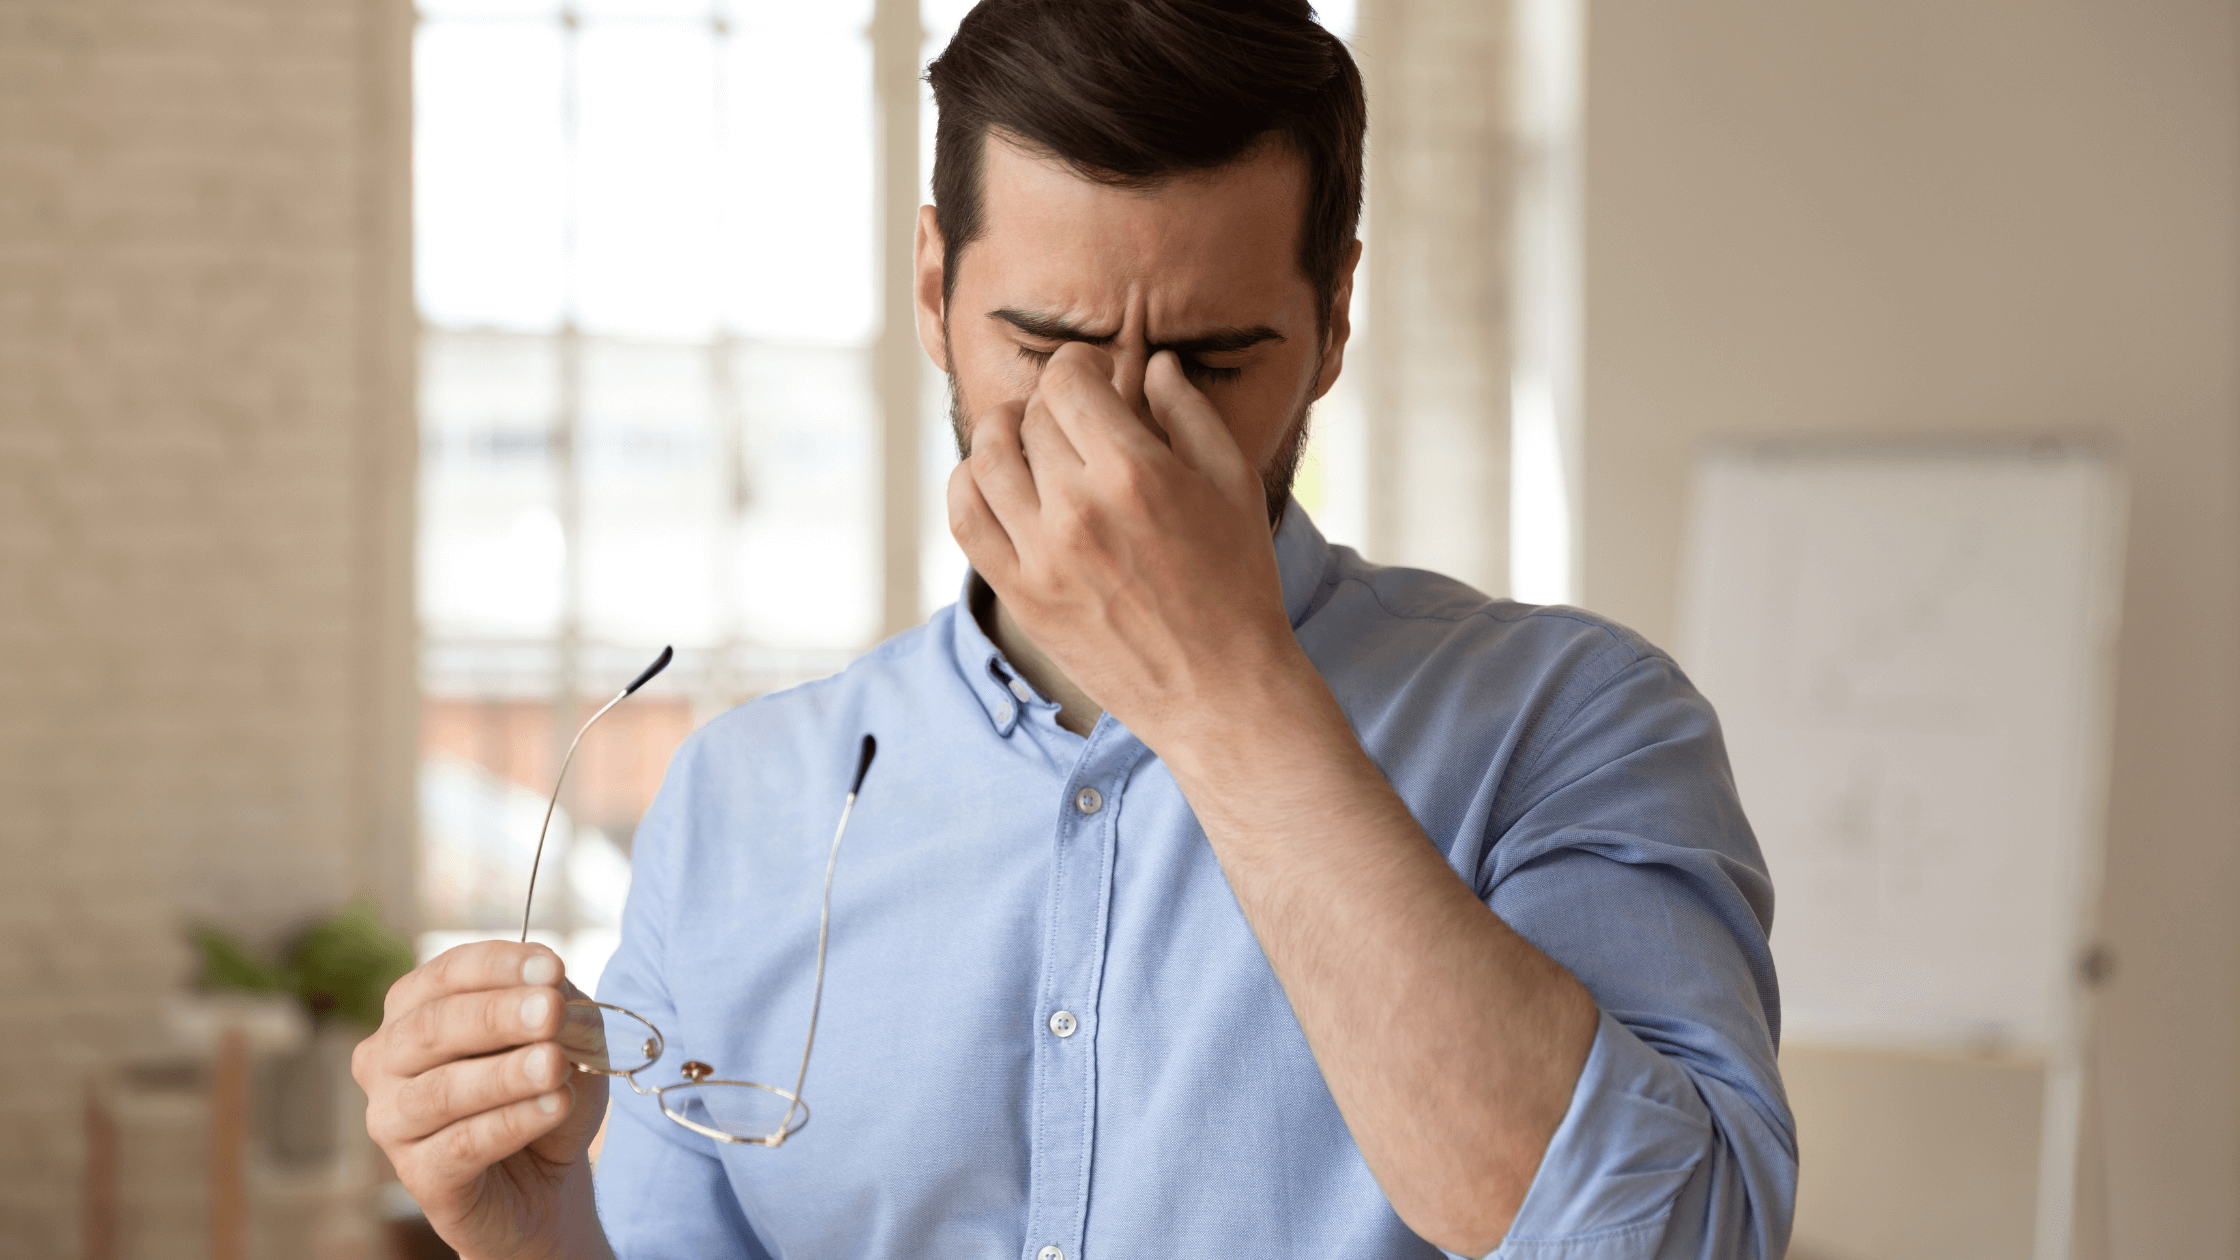 5-health-conditions-that-can-cause-dry-eye-syndrome